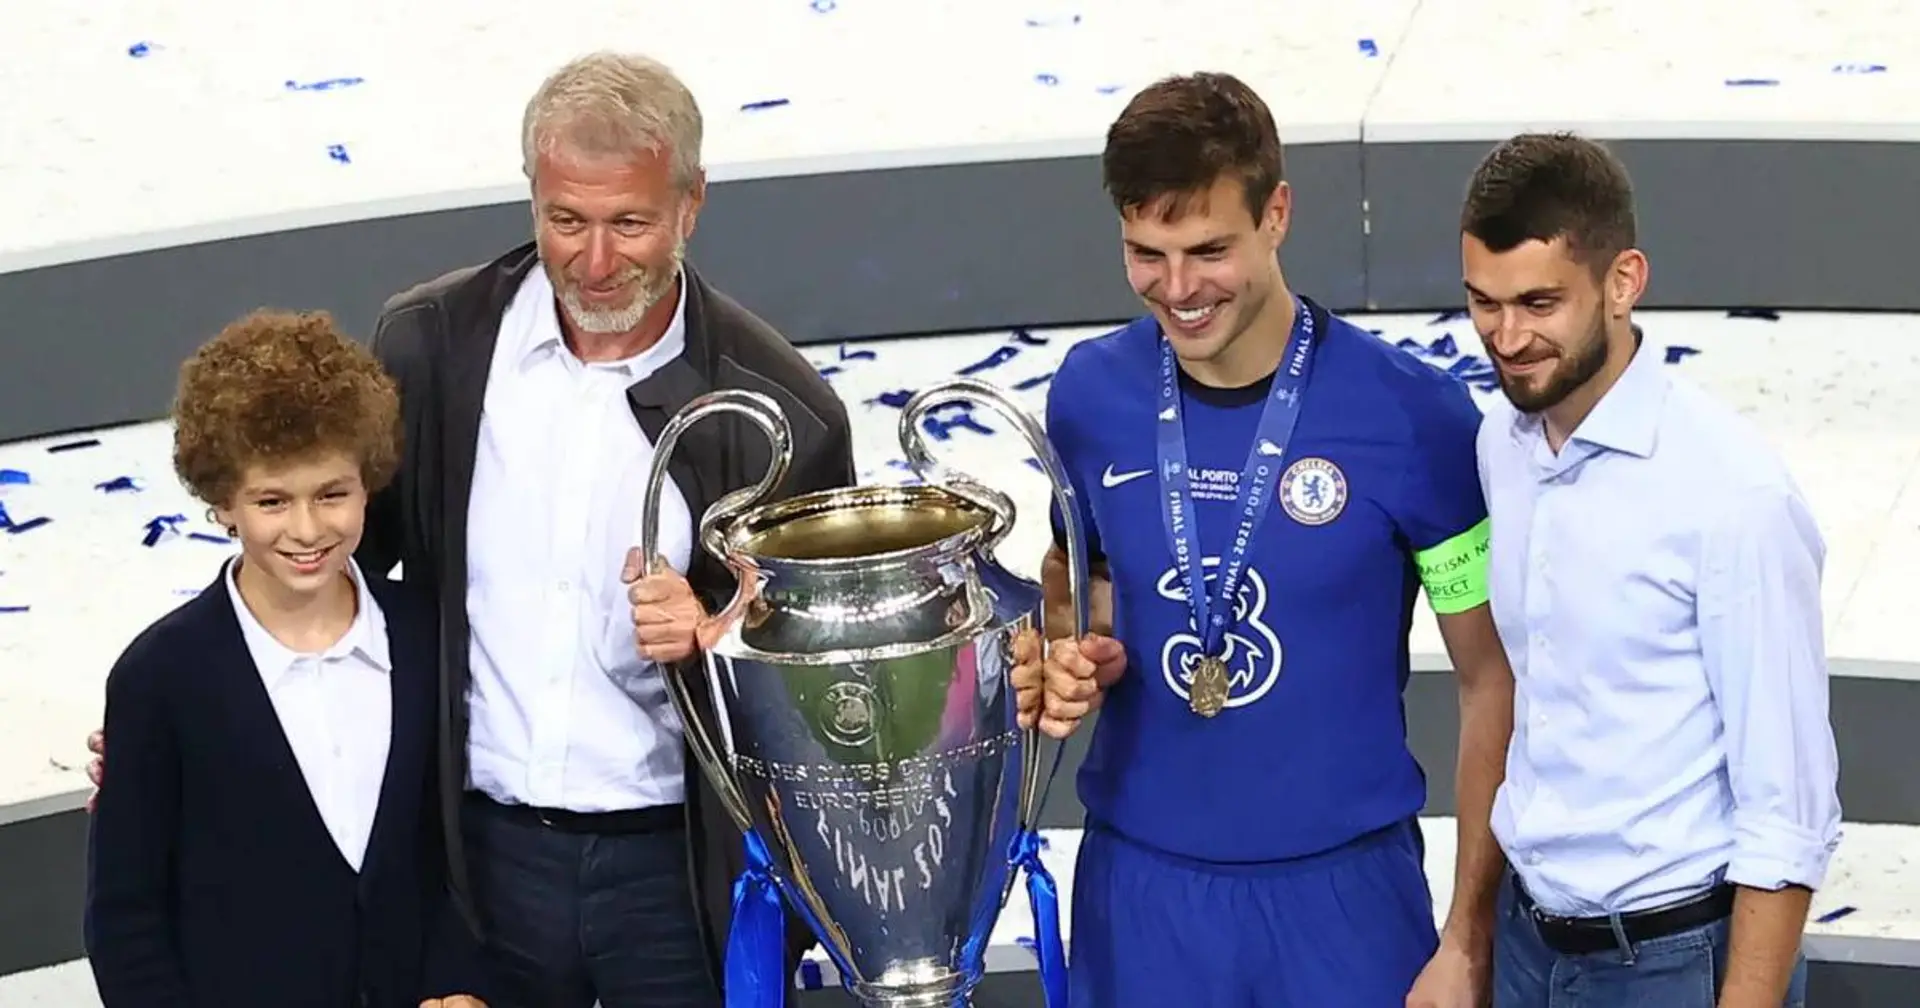 Azpilicueta: 'Mr. Abramovich lives for Chelsea, he's brought this club to top of the world'